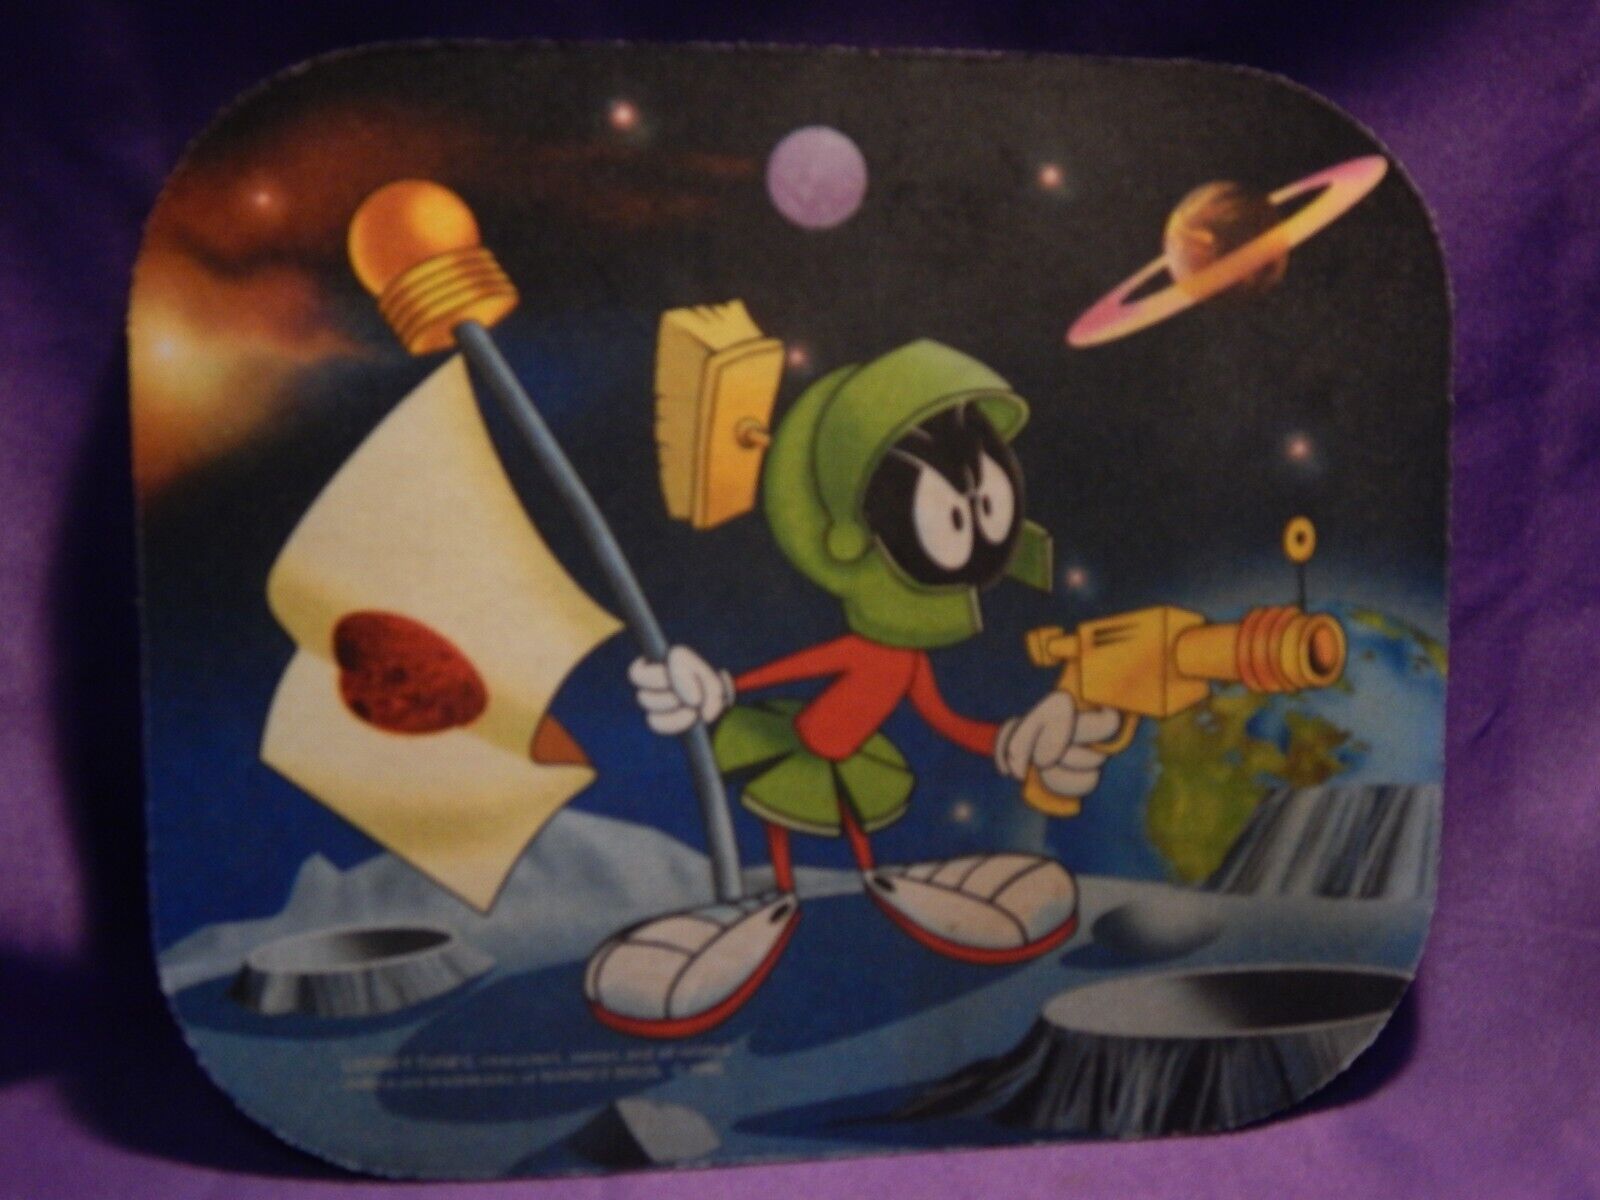 MARVIN THE MARTIAN NON-SLIP MOUSE PAD 1995 HOME OFFICE WARNER BROS. LOONEY TUNES